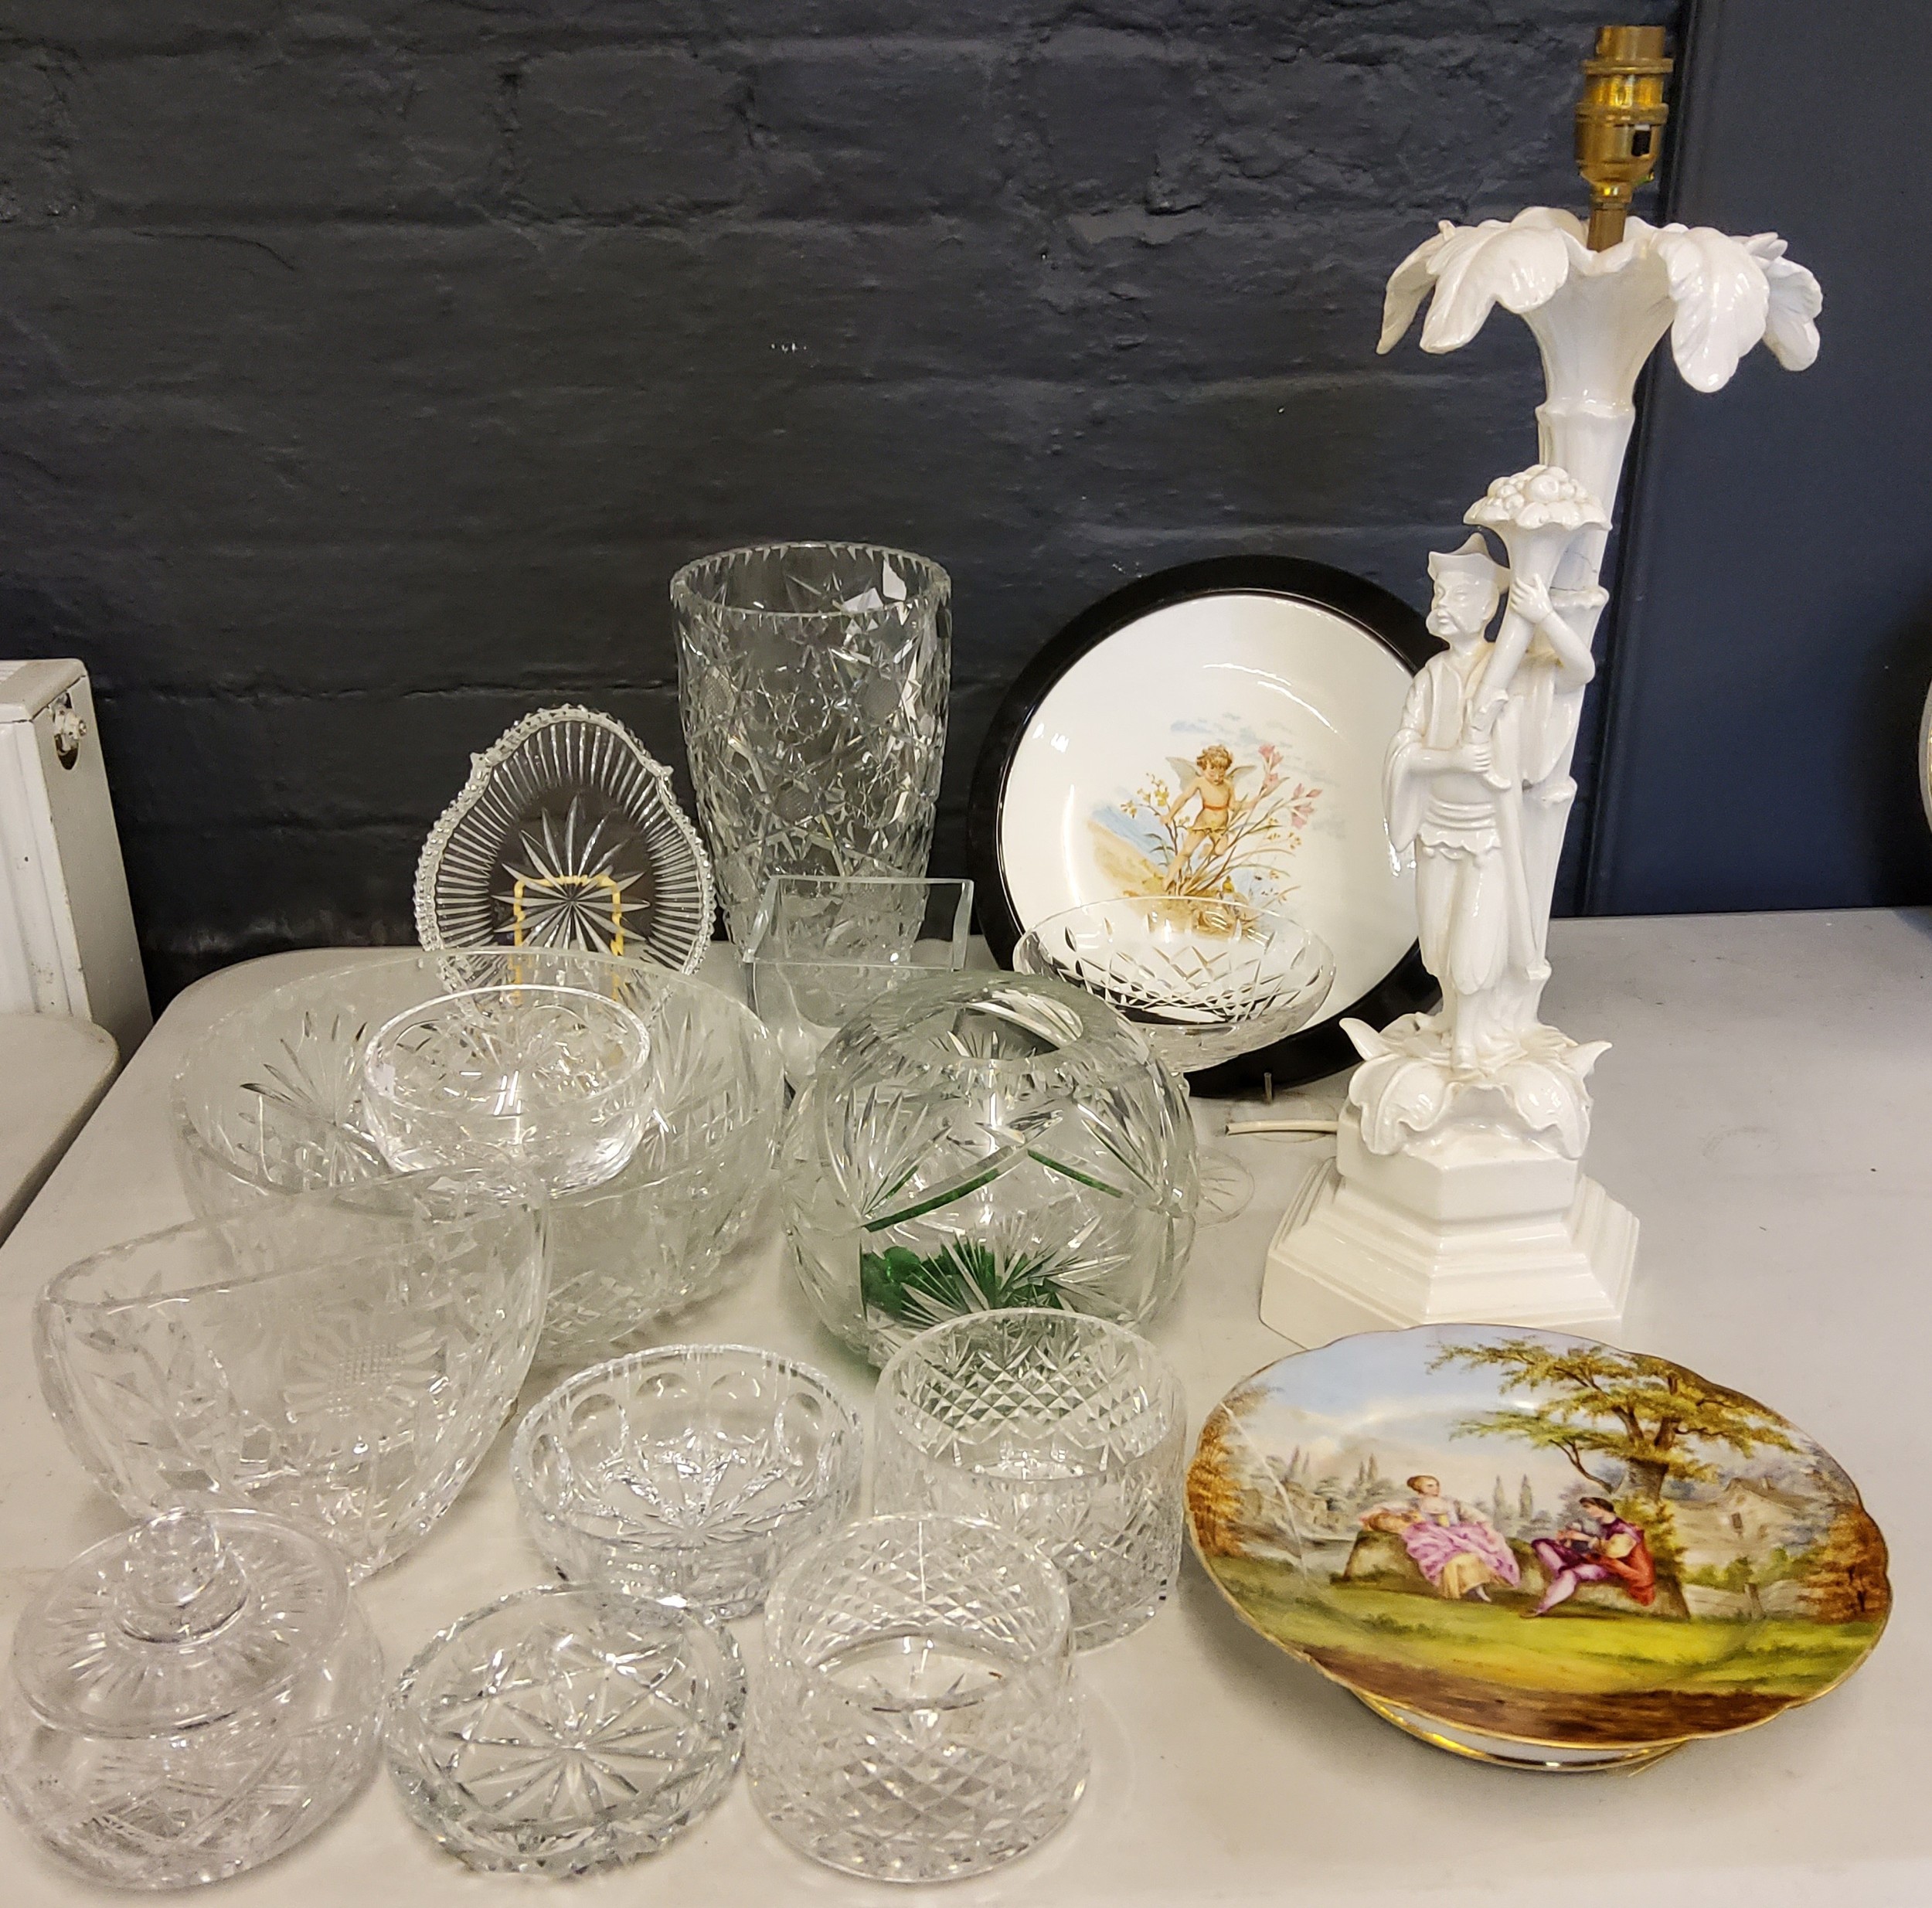 Glassware - a heavy cut glass vase;  others;  bowls;  tray;  A French shaped circular pedestal